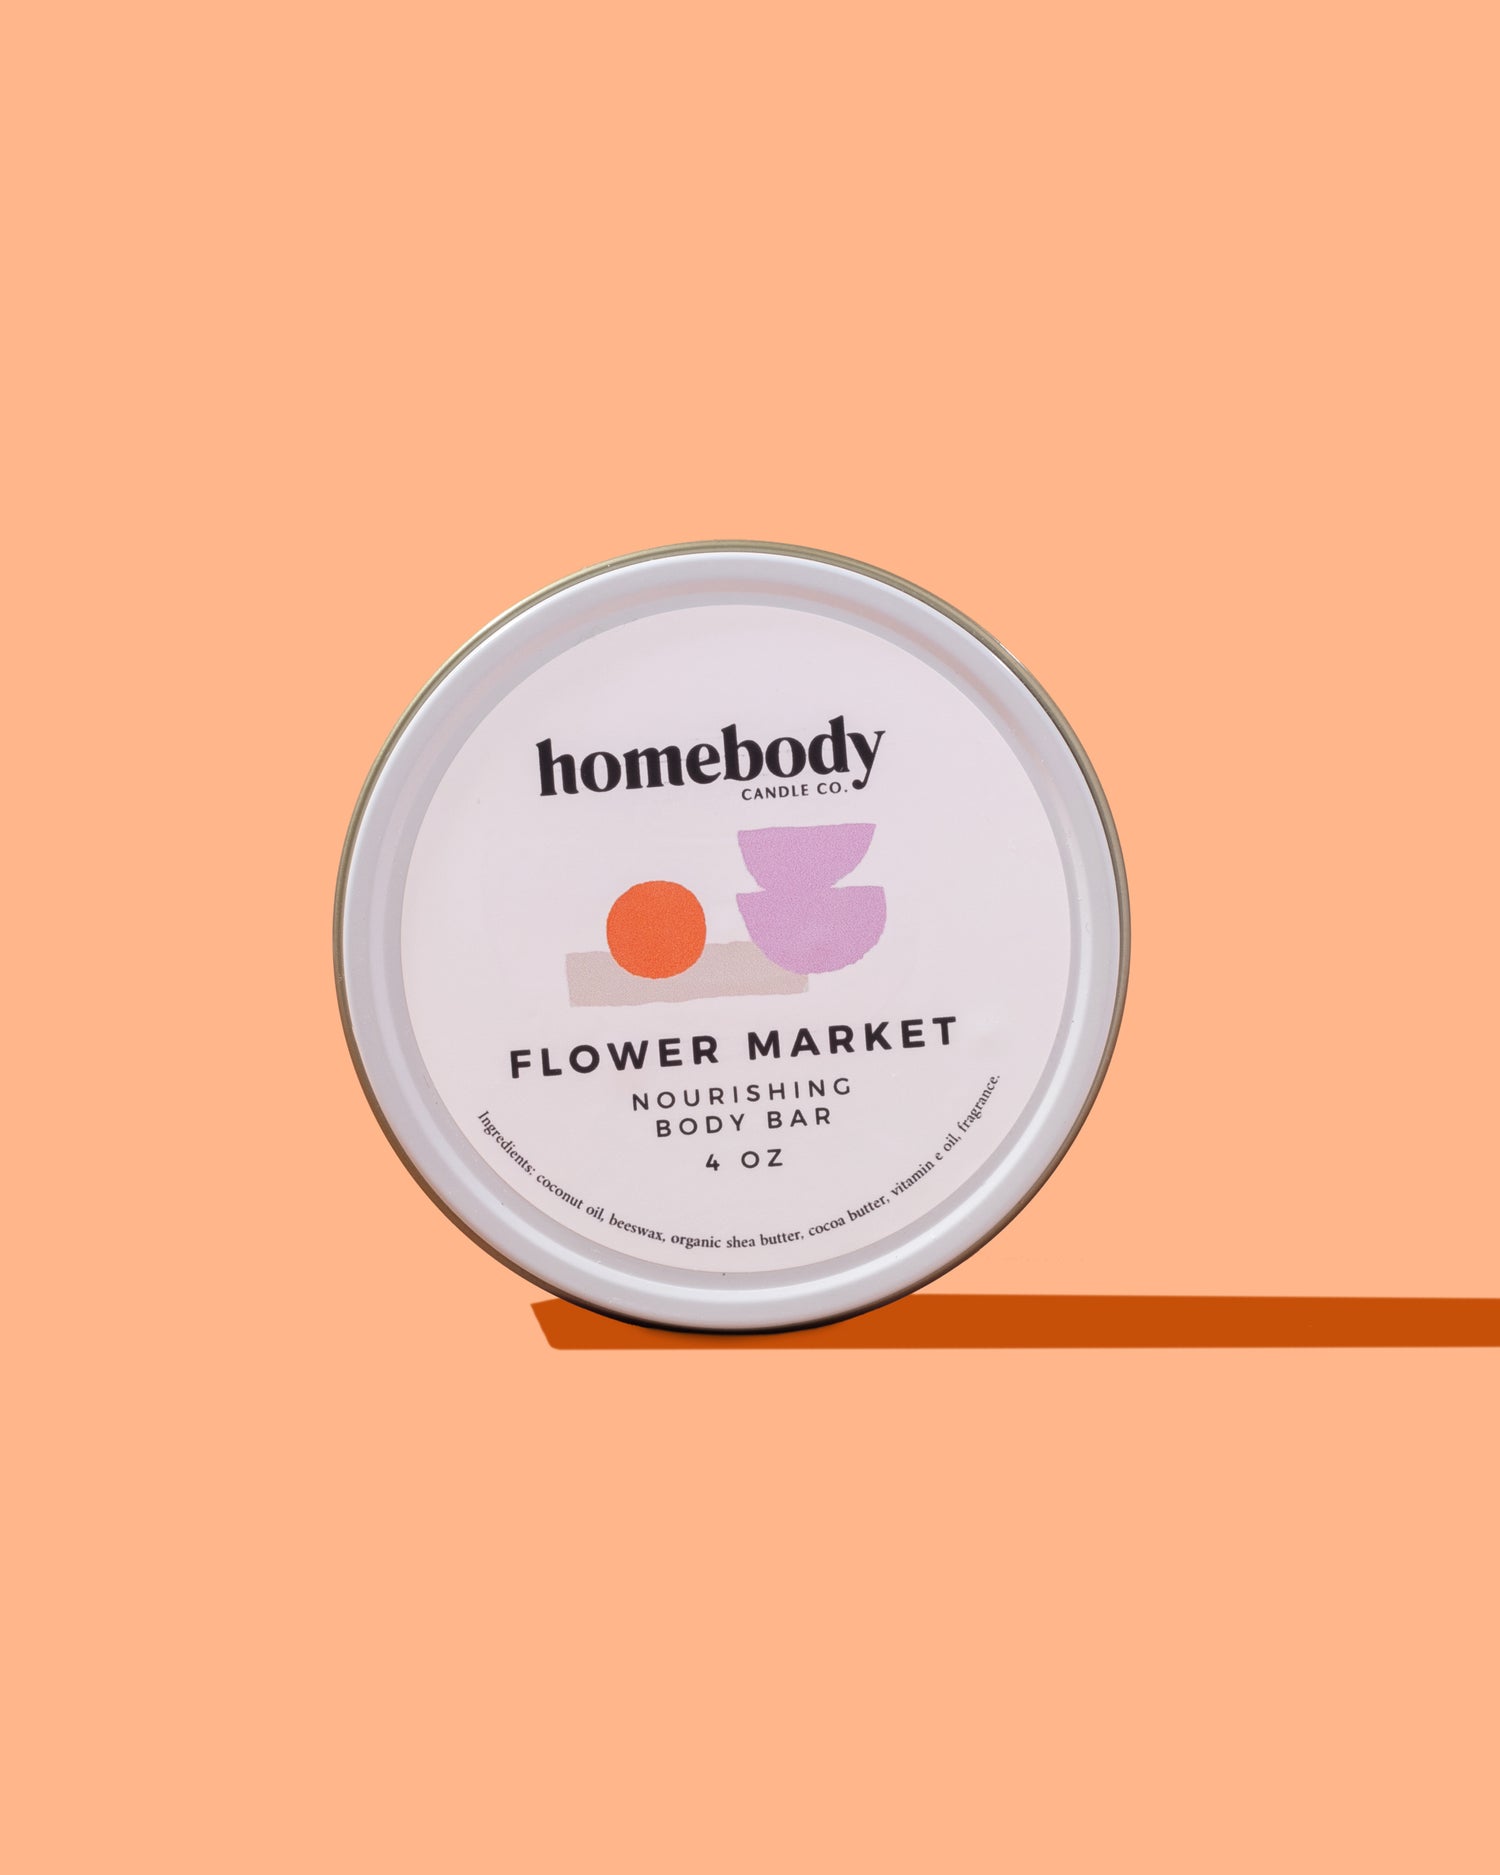 Flower Market body bar Homebody Candle Co